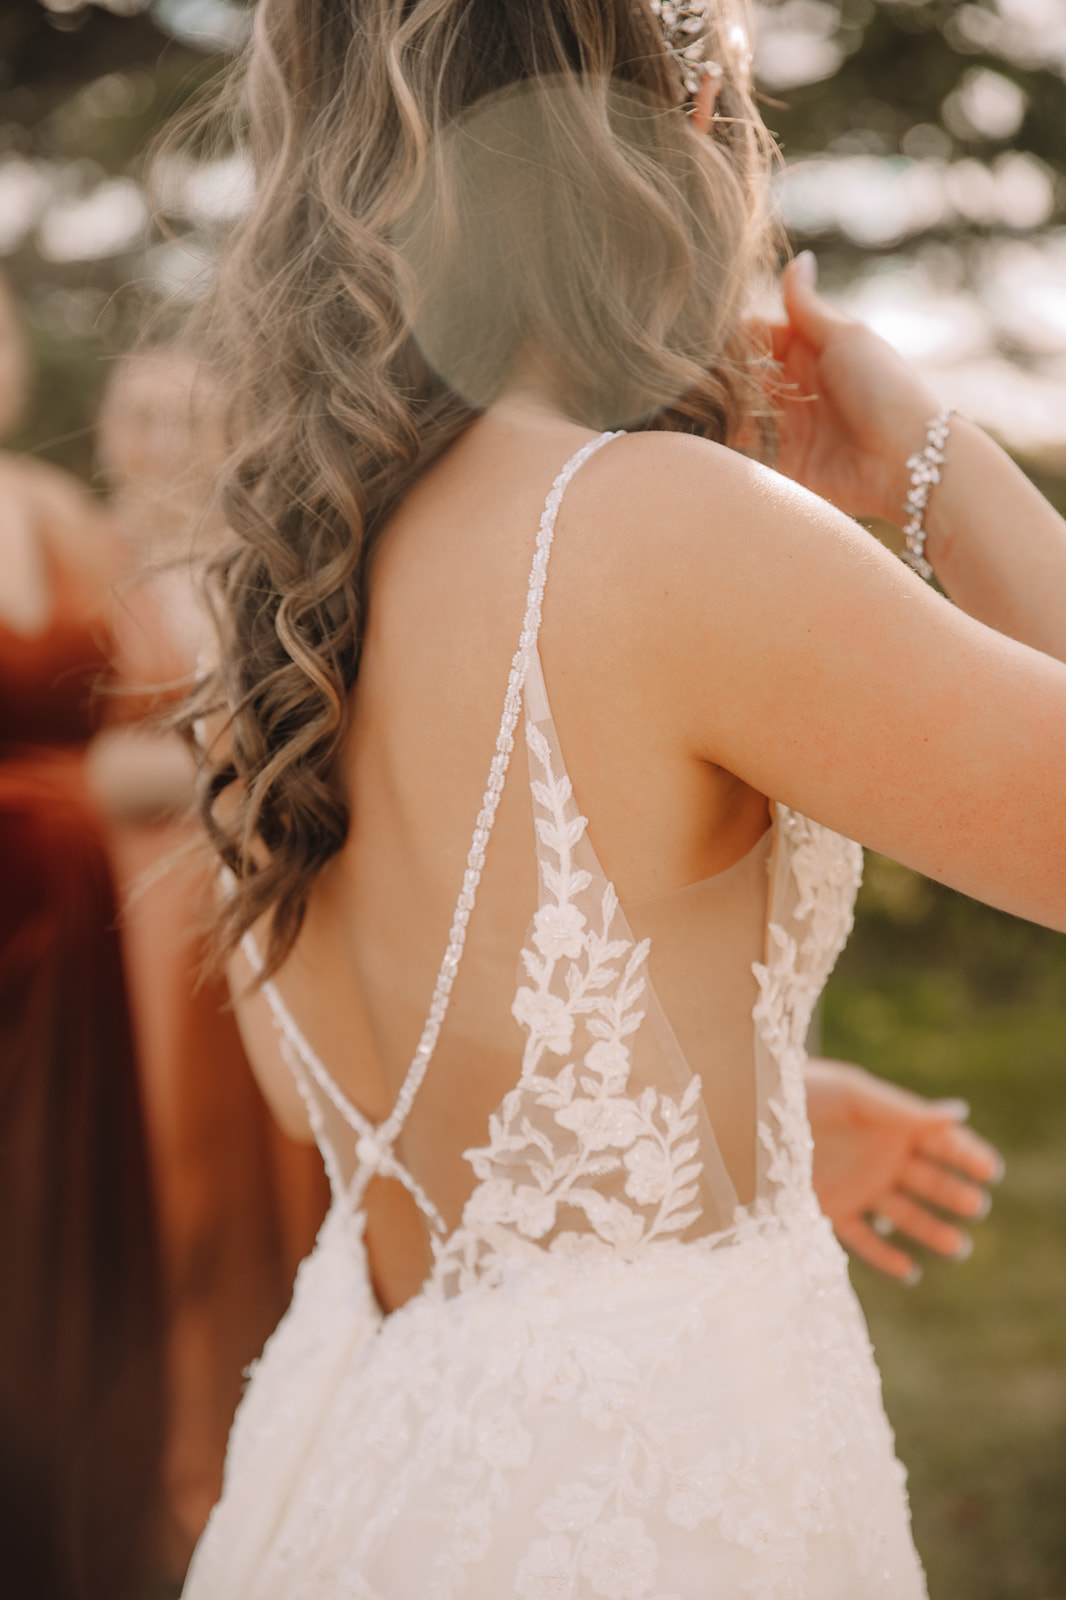 Detail photo of bride's open back, lace wedding dress with thin straps